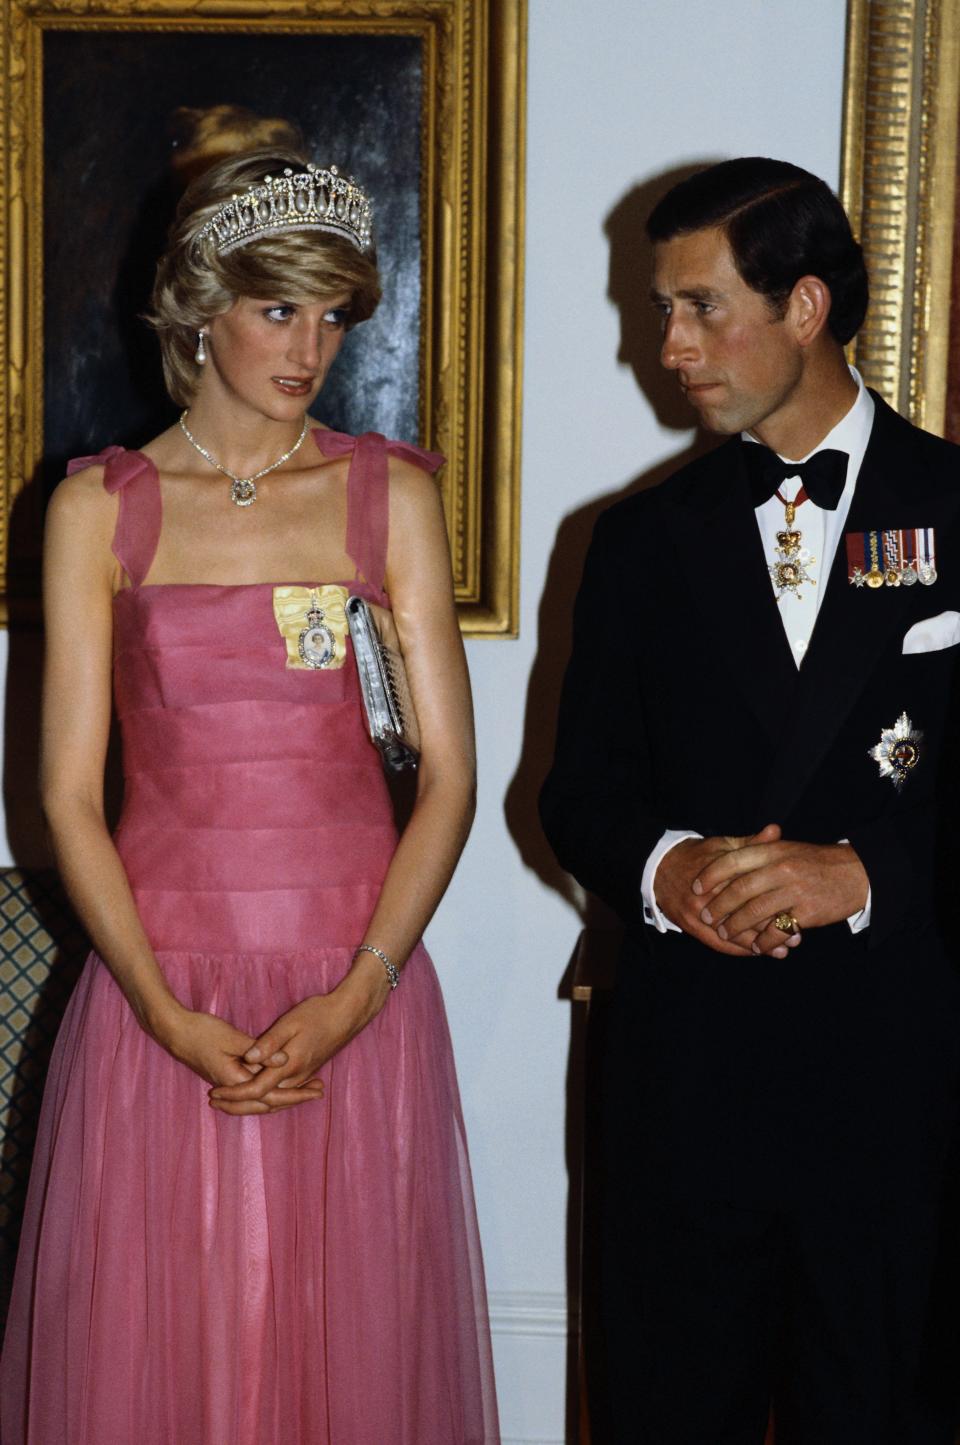 Princess Diana previously claimed she doesn’t think Prince Charles will be able to adapt to the role of King. Source: Getty